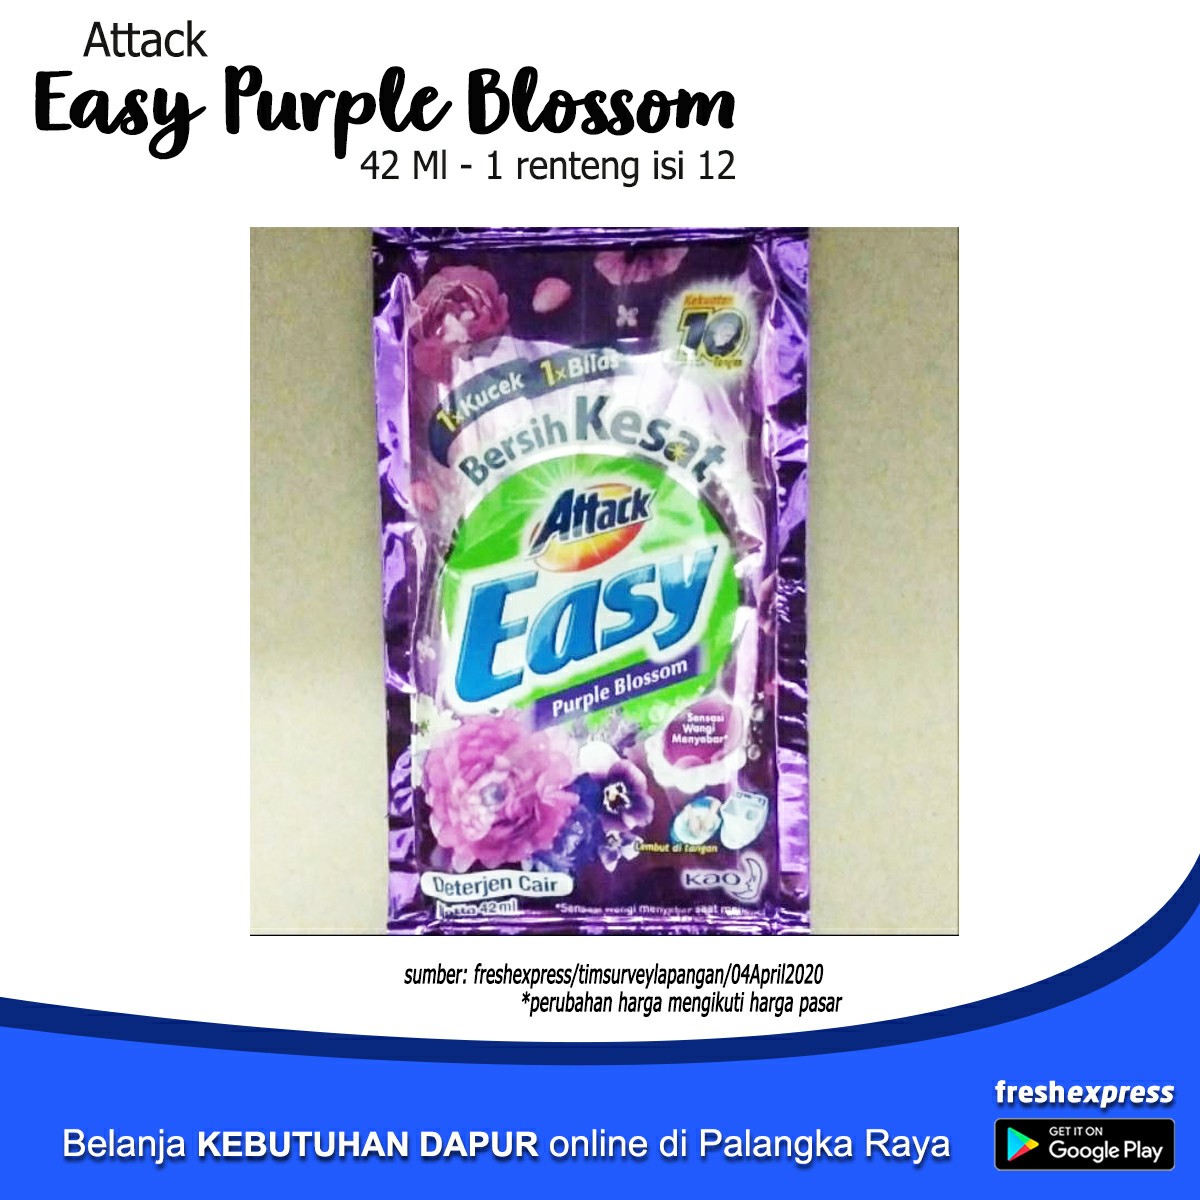 Attack Easy Purple Blossom 1 Renteng Isi 12